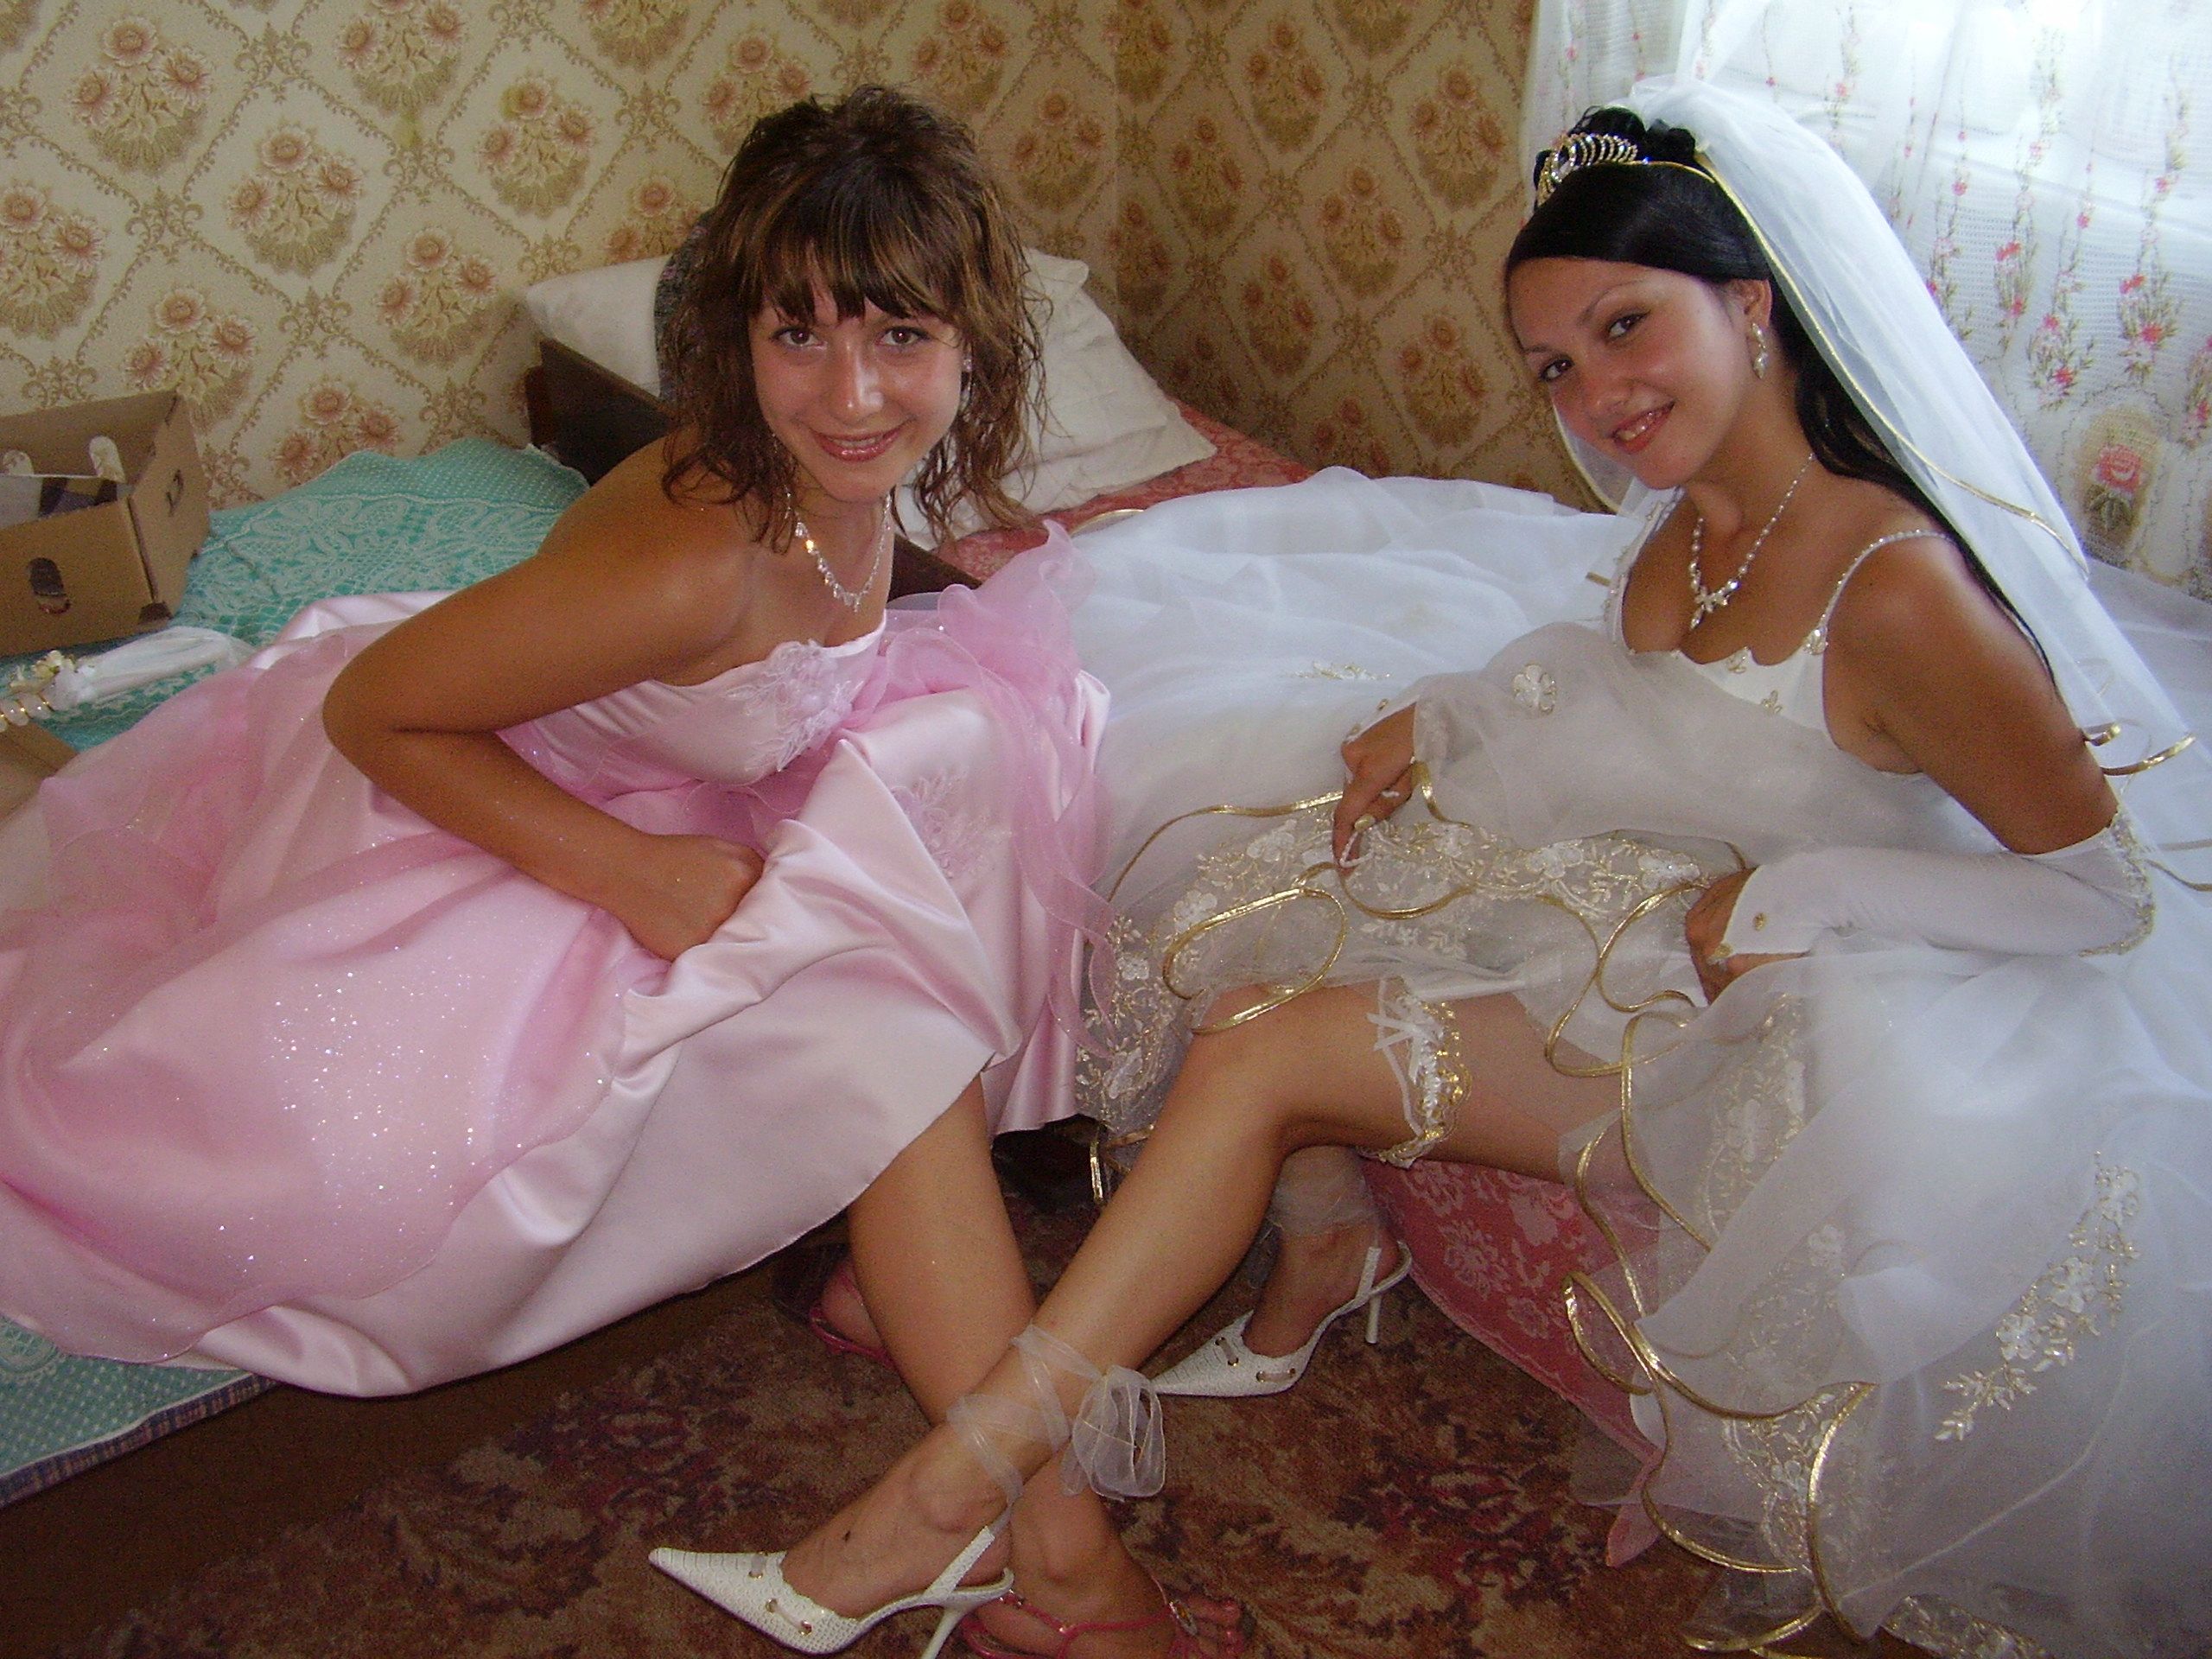 Outdoors Marriage Ceremony With Naked Bride And Her Friends